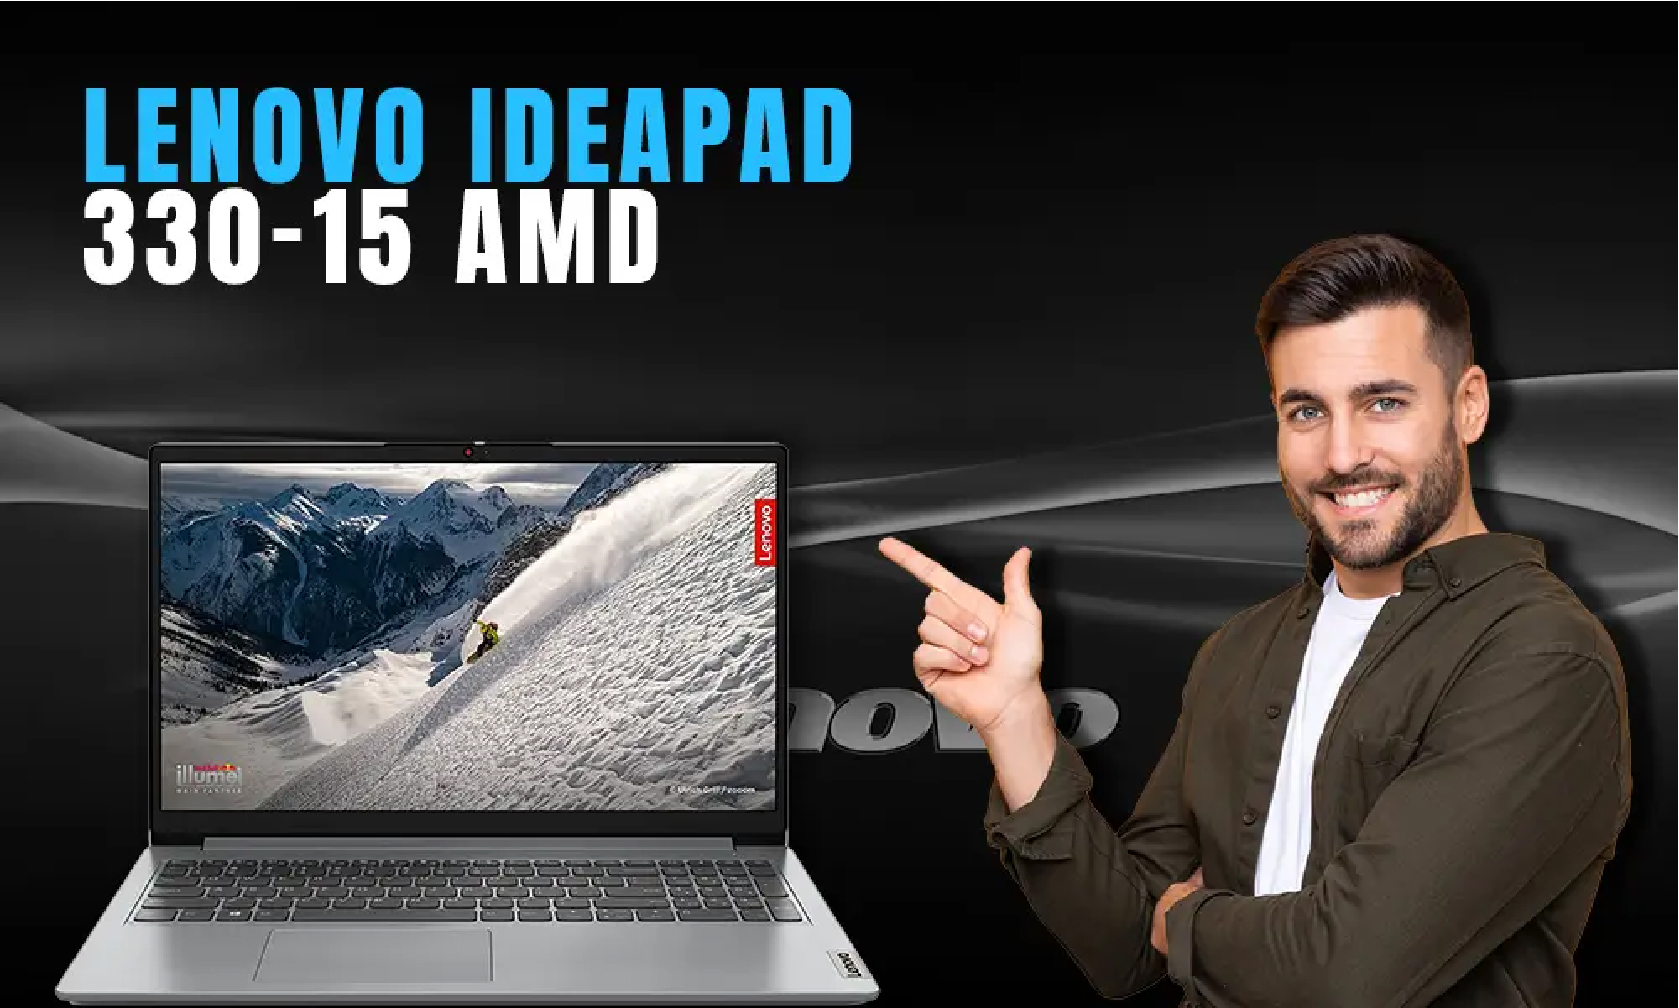 The Potential Lenovo IdeaPad 330-15 AMD Review